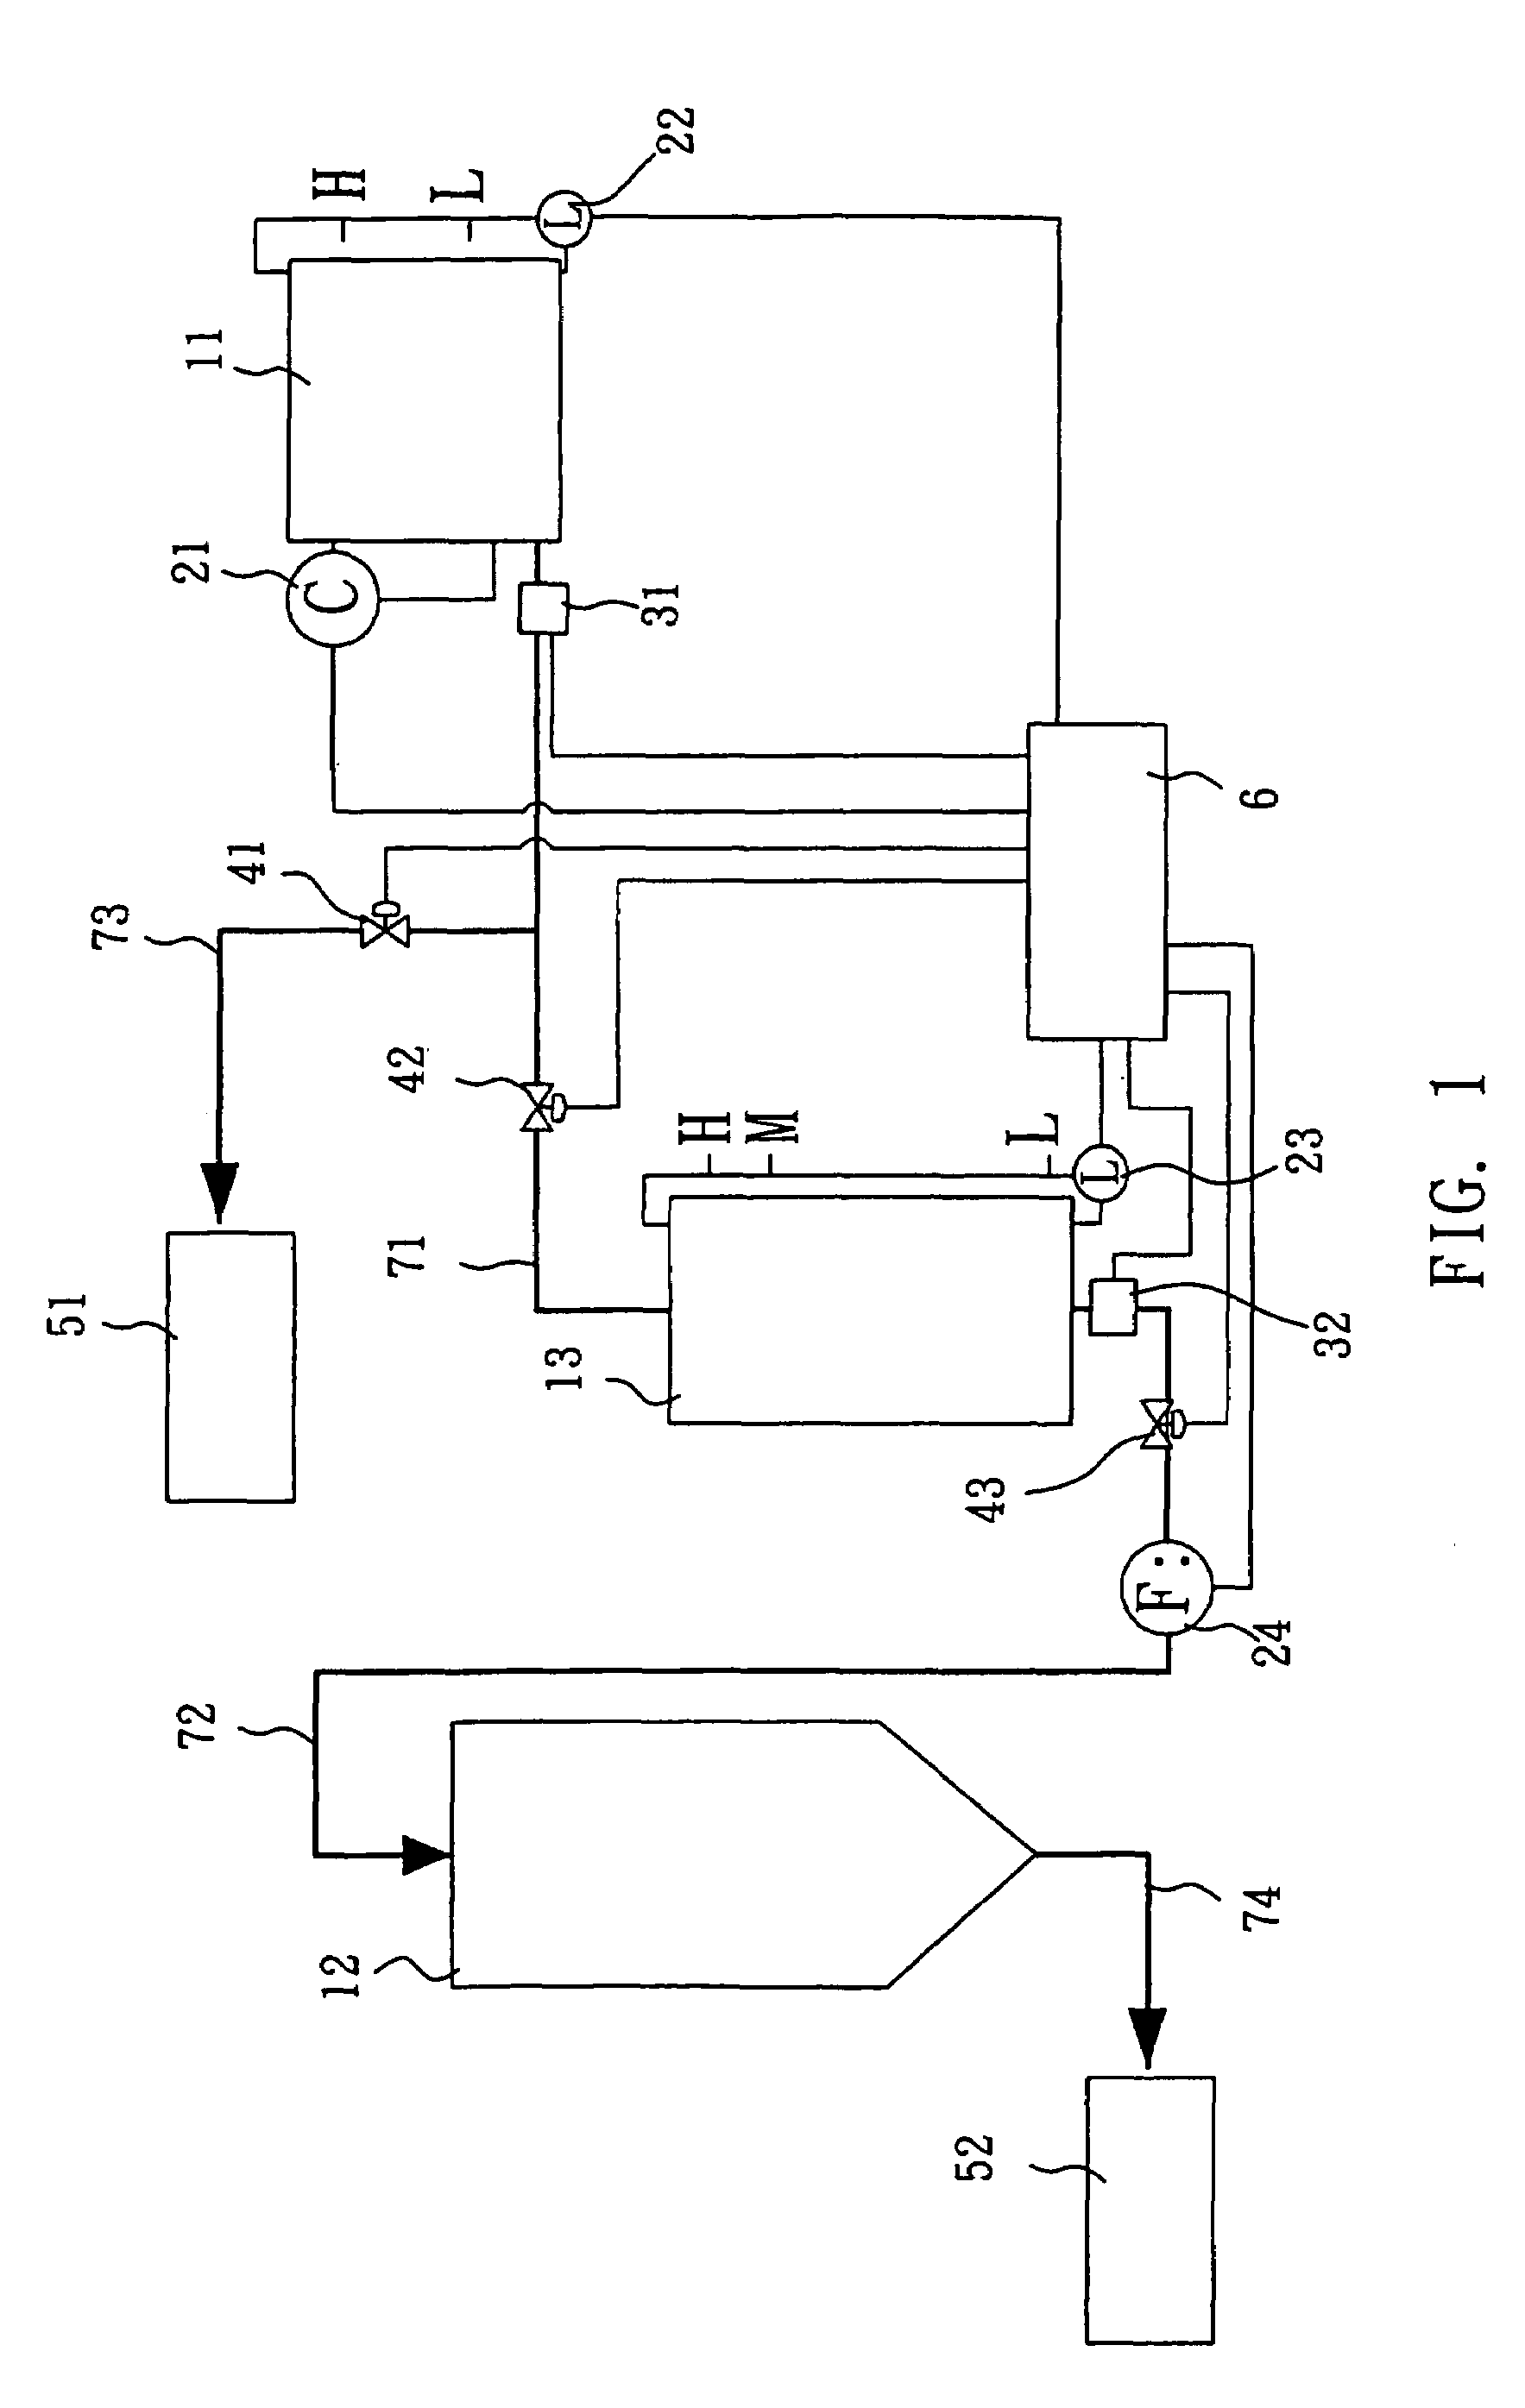 Apparatus for condensing and recycling stripper